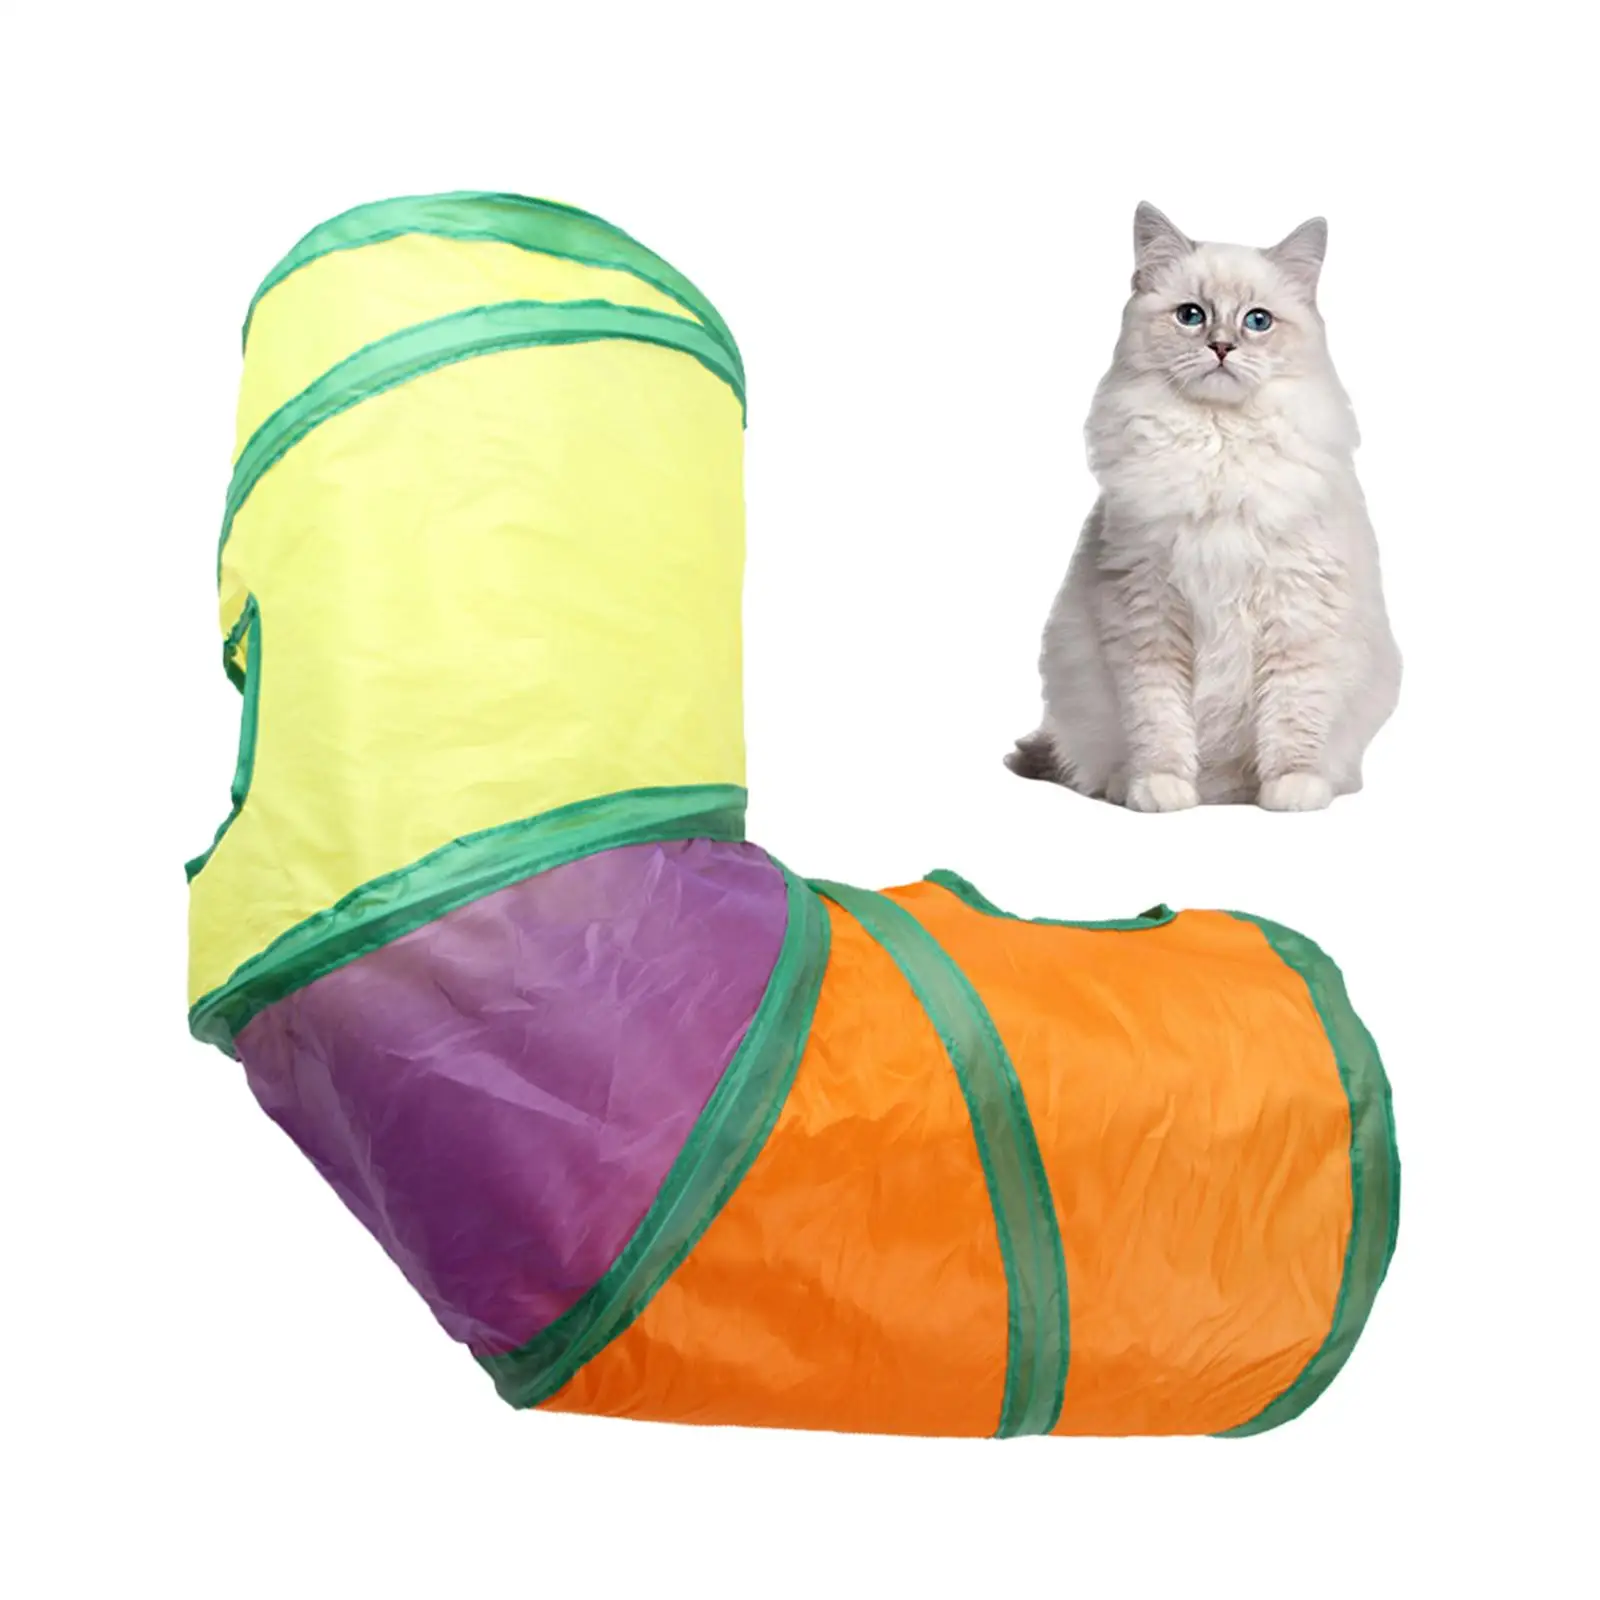 2 Entrances Cat Tunnel Toy Collapsible L Shape Multicolor Small Animal Play Tunnel Tent Puzzle Tunnels for Rabbit Hiding Bunny